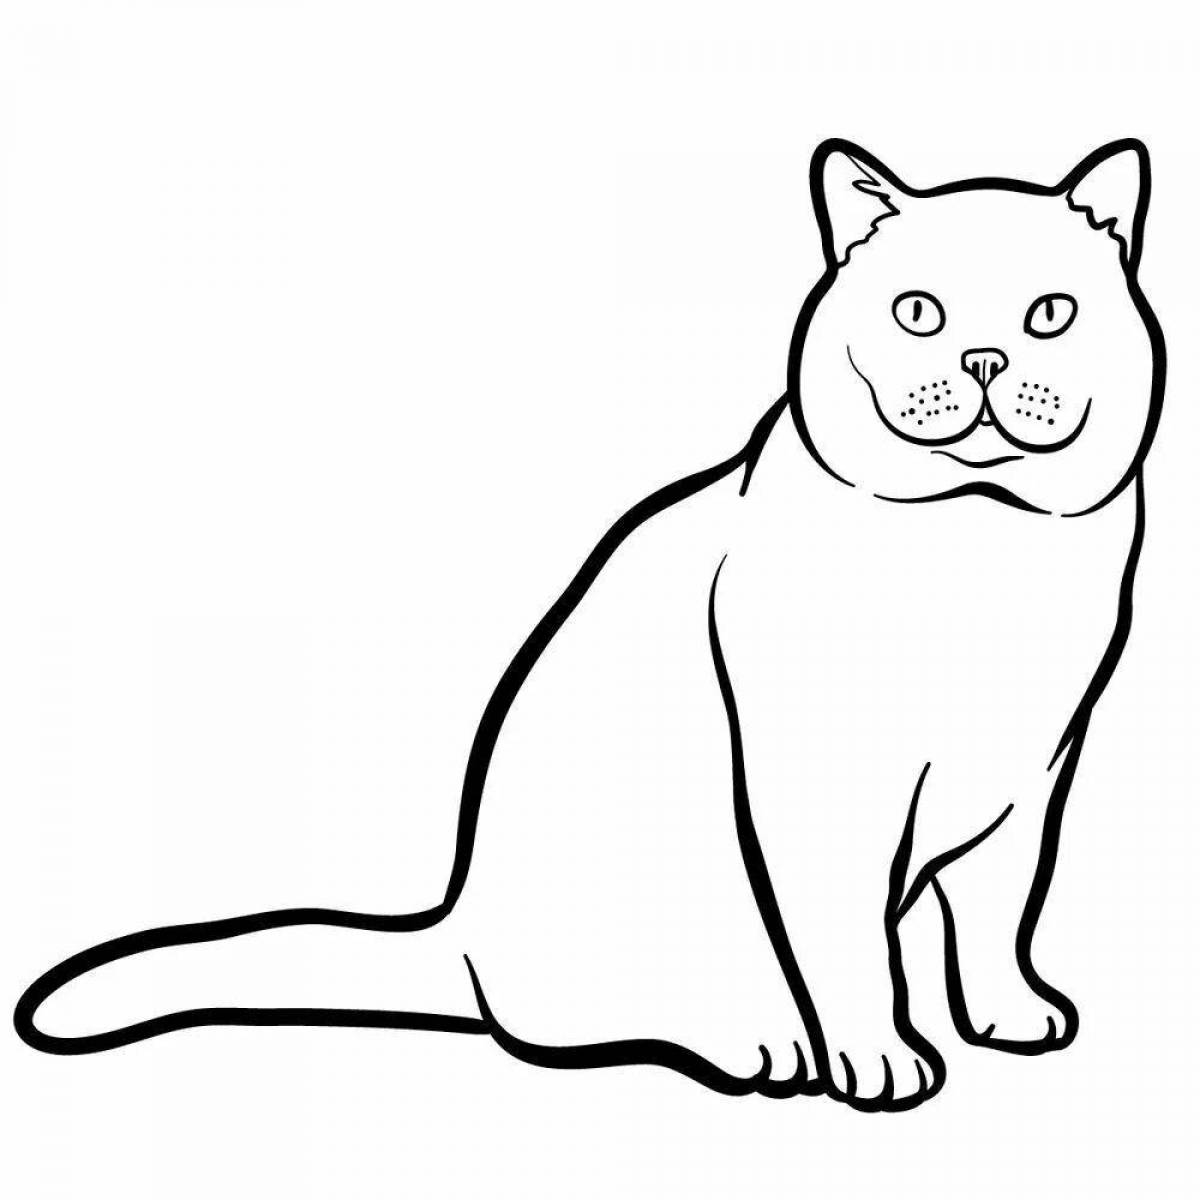 Colourful british cat coloring page